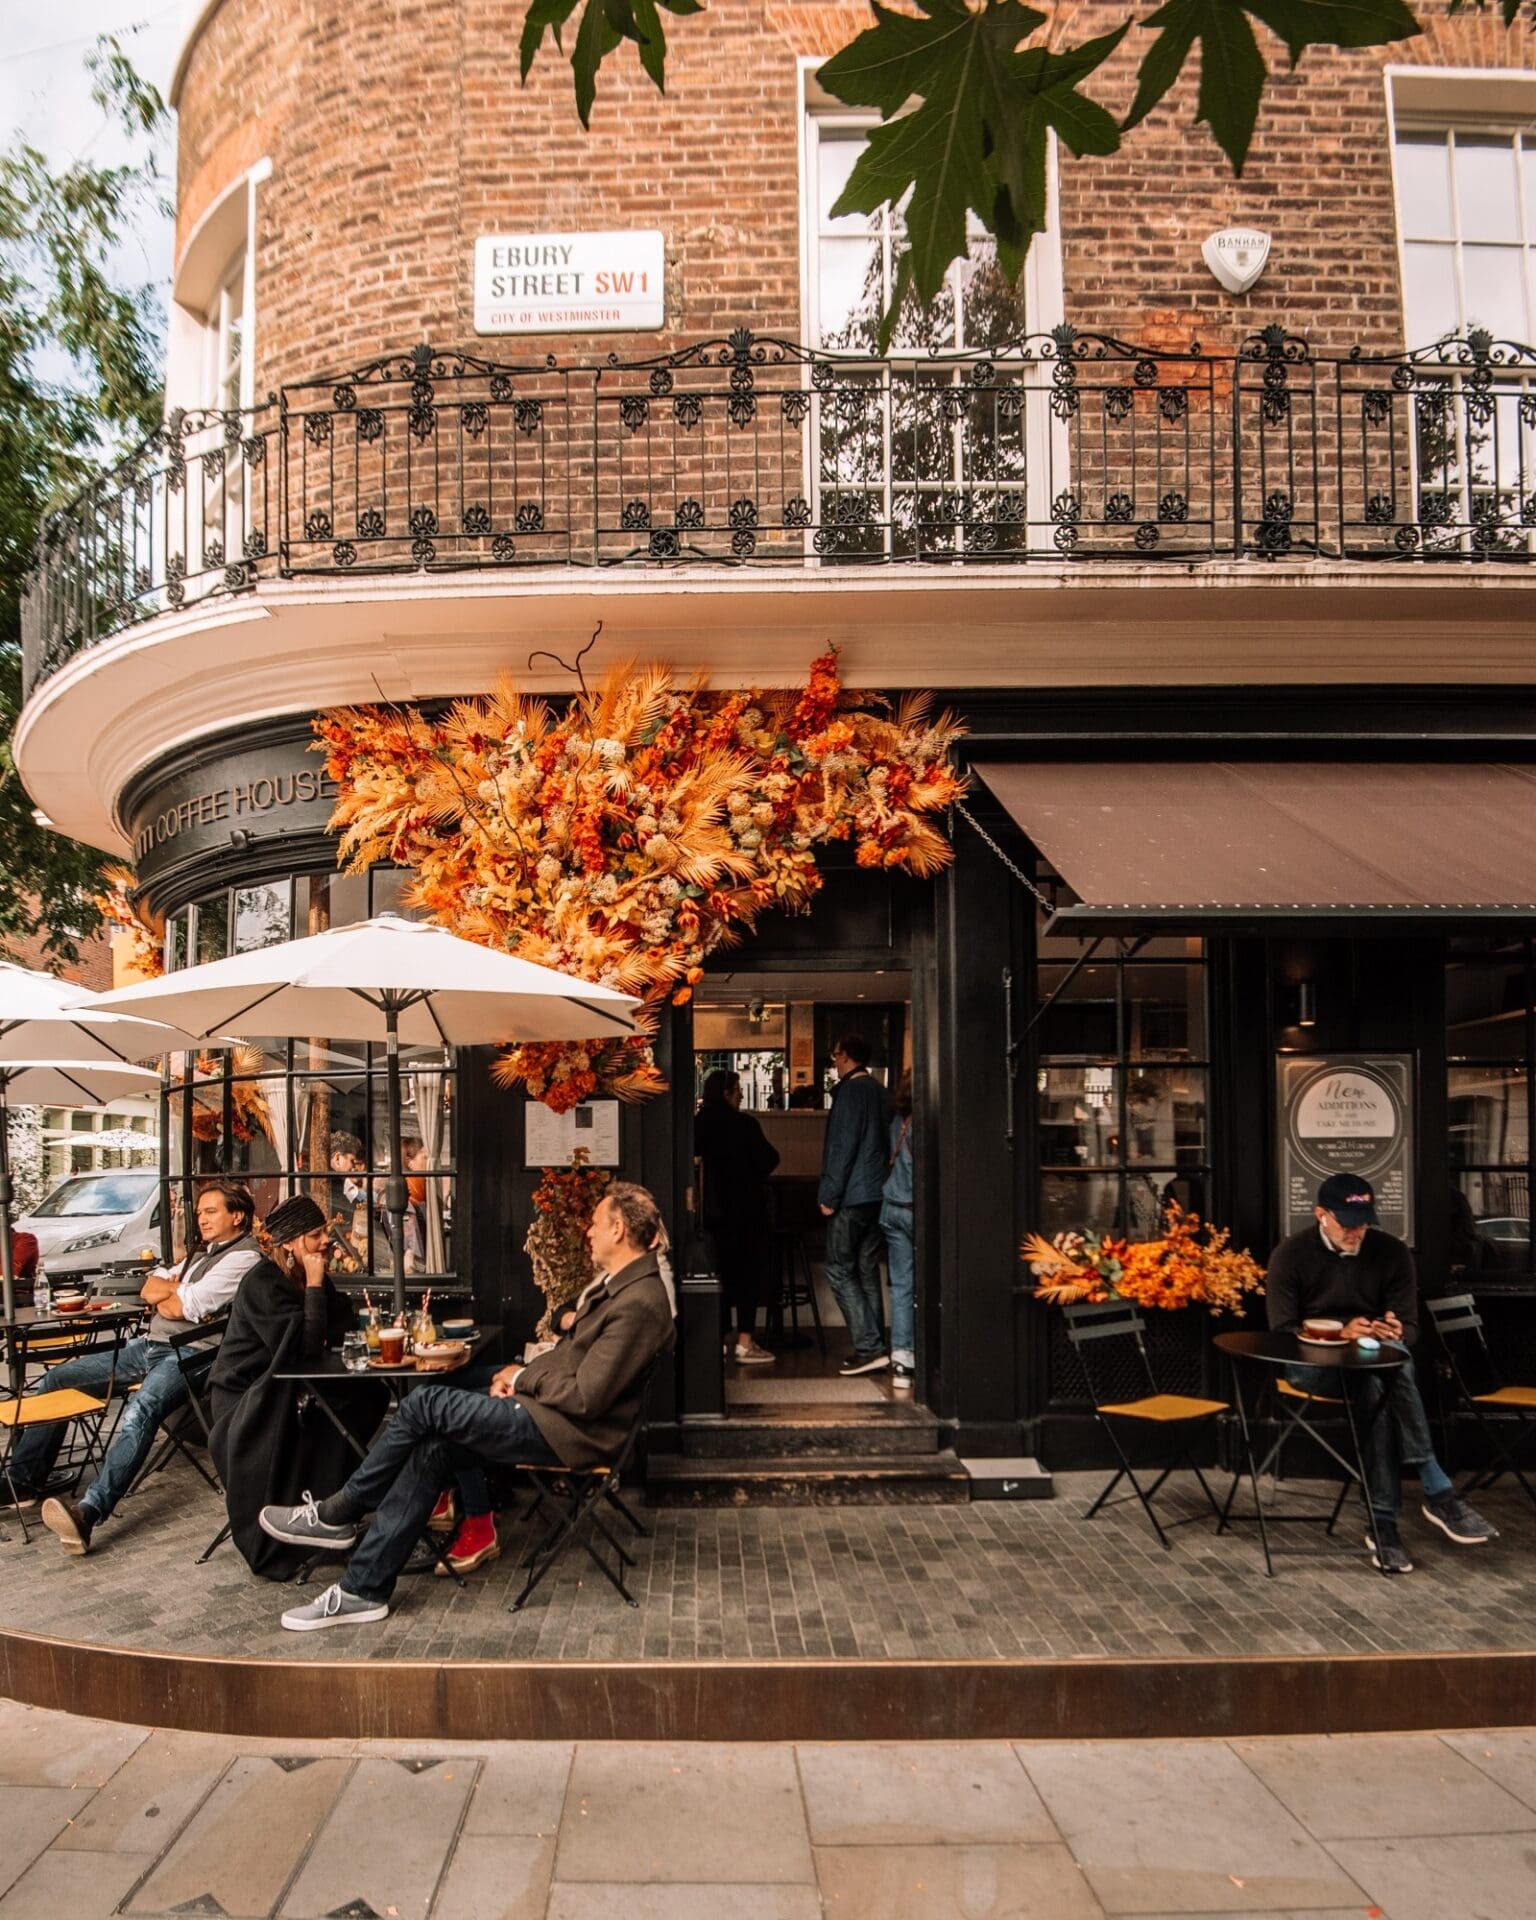 The floral facade and outdoor seating at Tomtom Coffee House in Belgravia, London